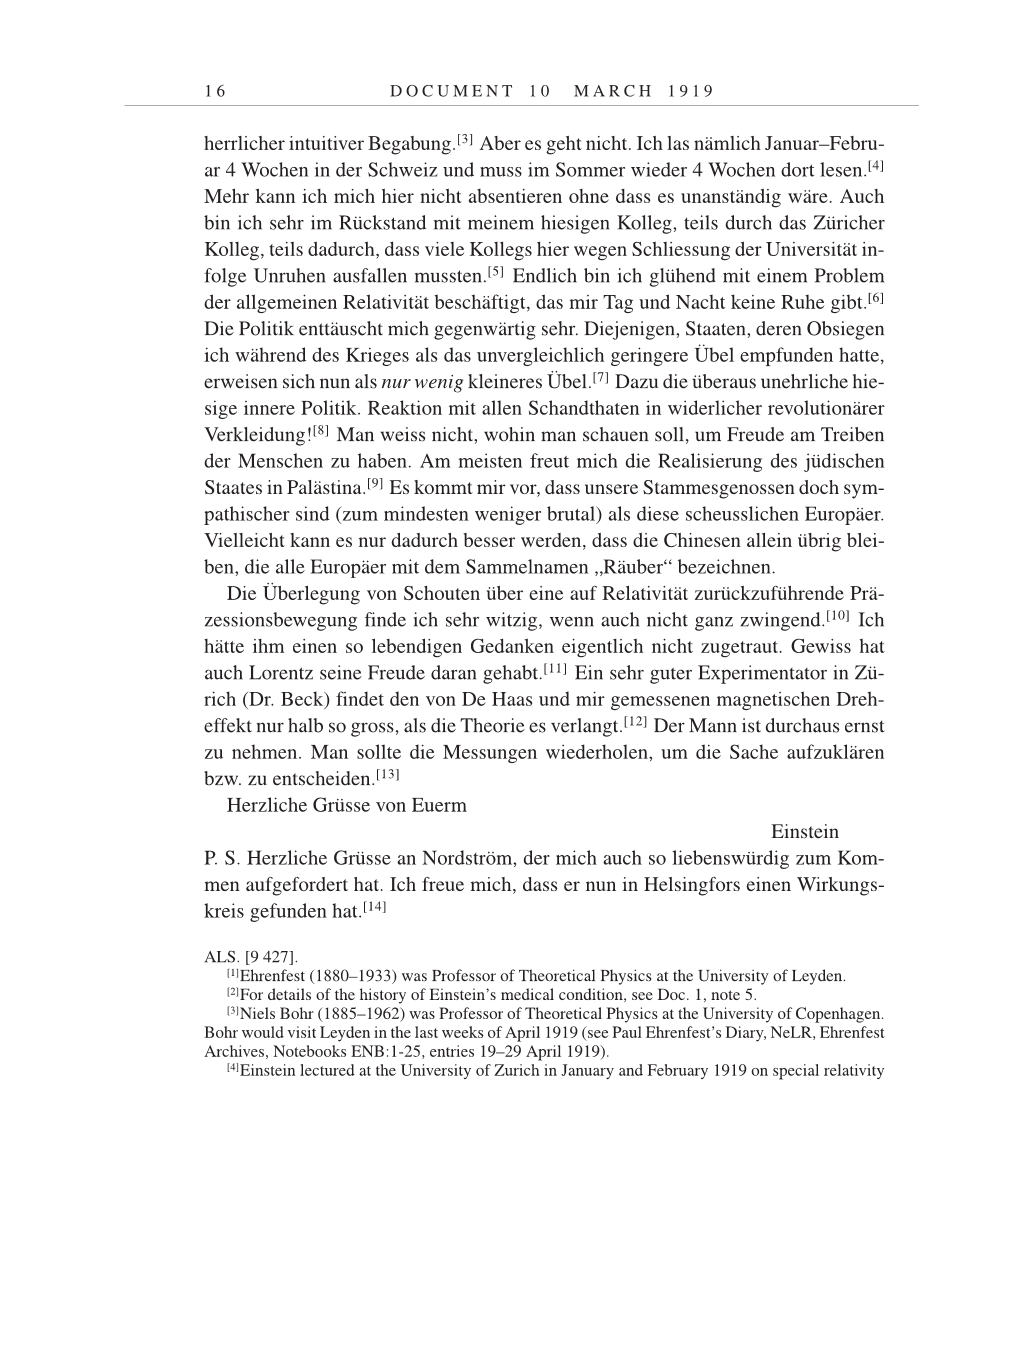 Volume 9: The Berlin Years: Correspondence January 1919-April 1920 page 16